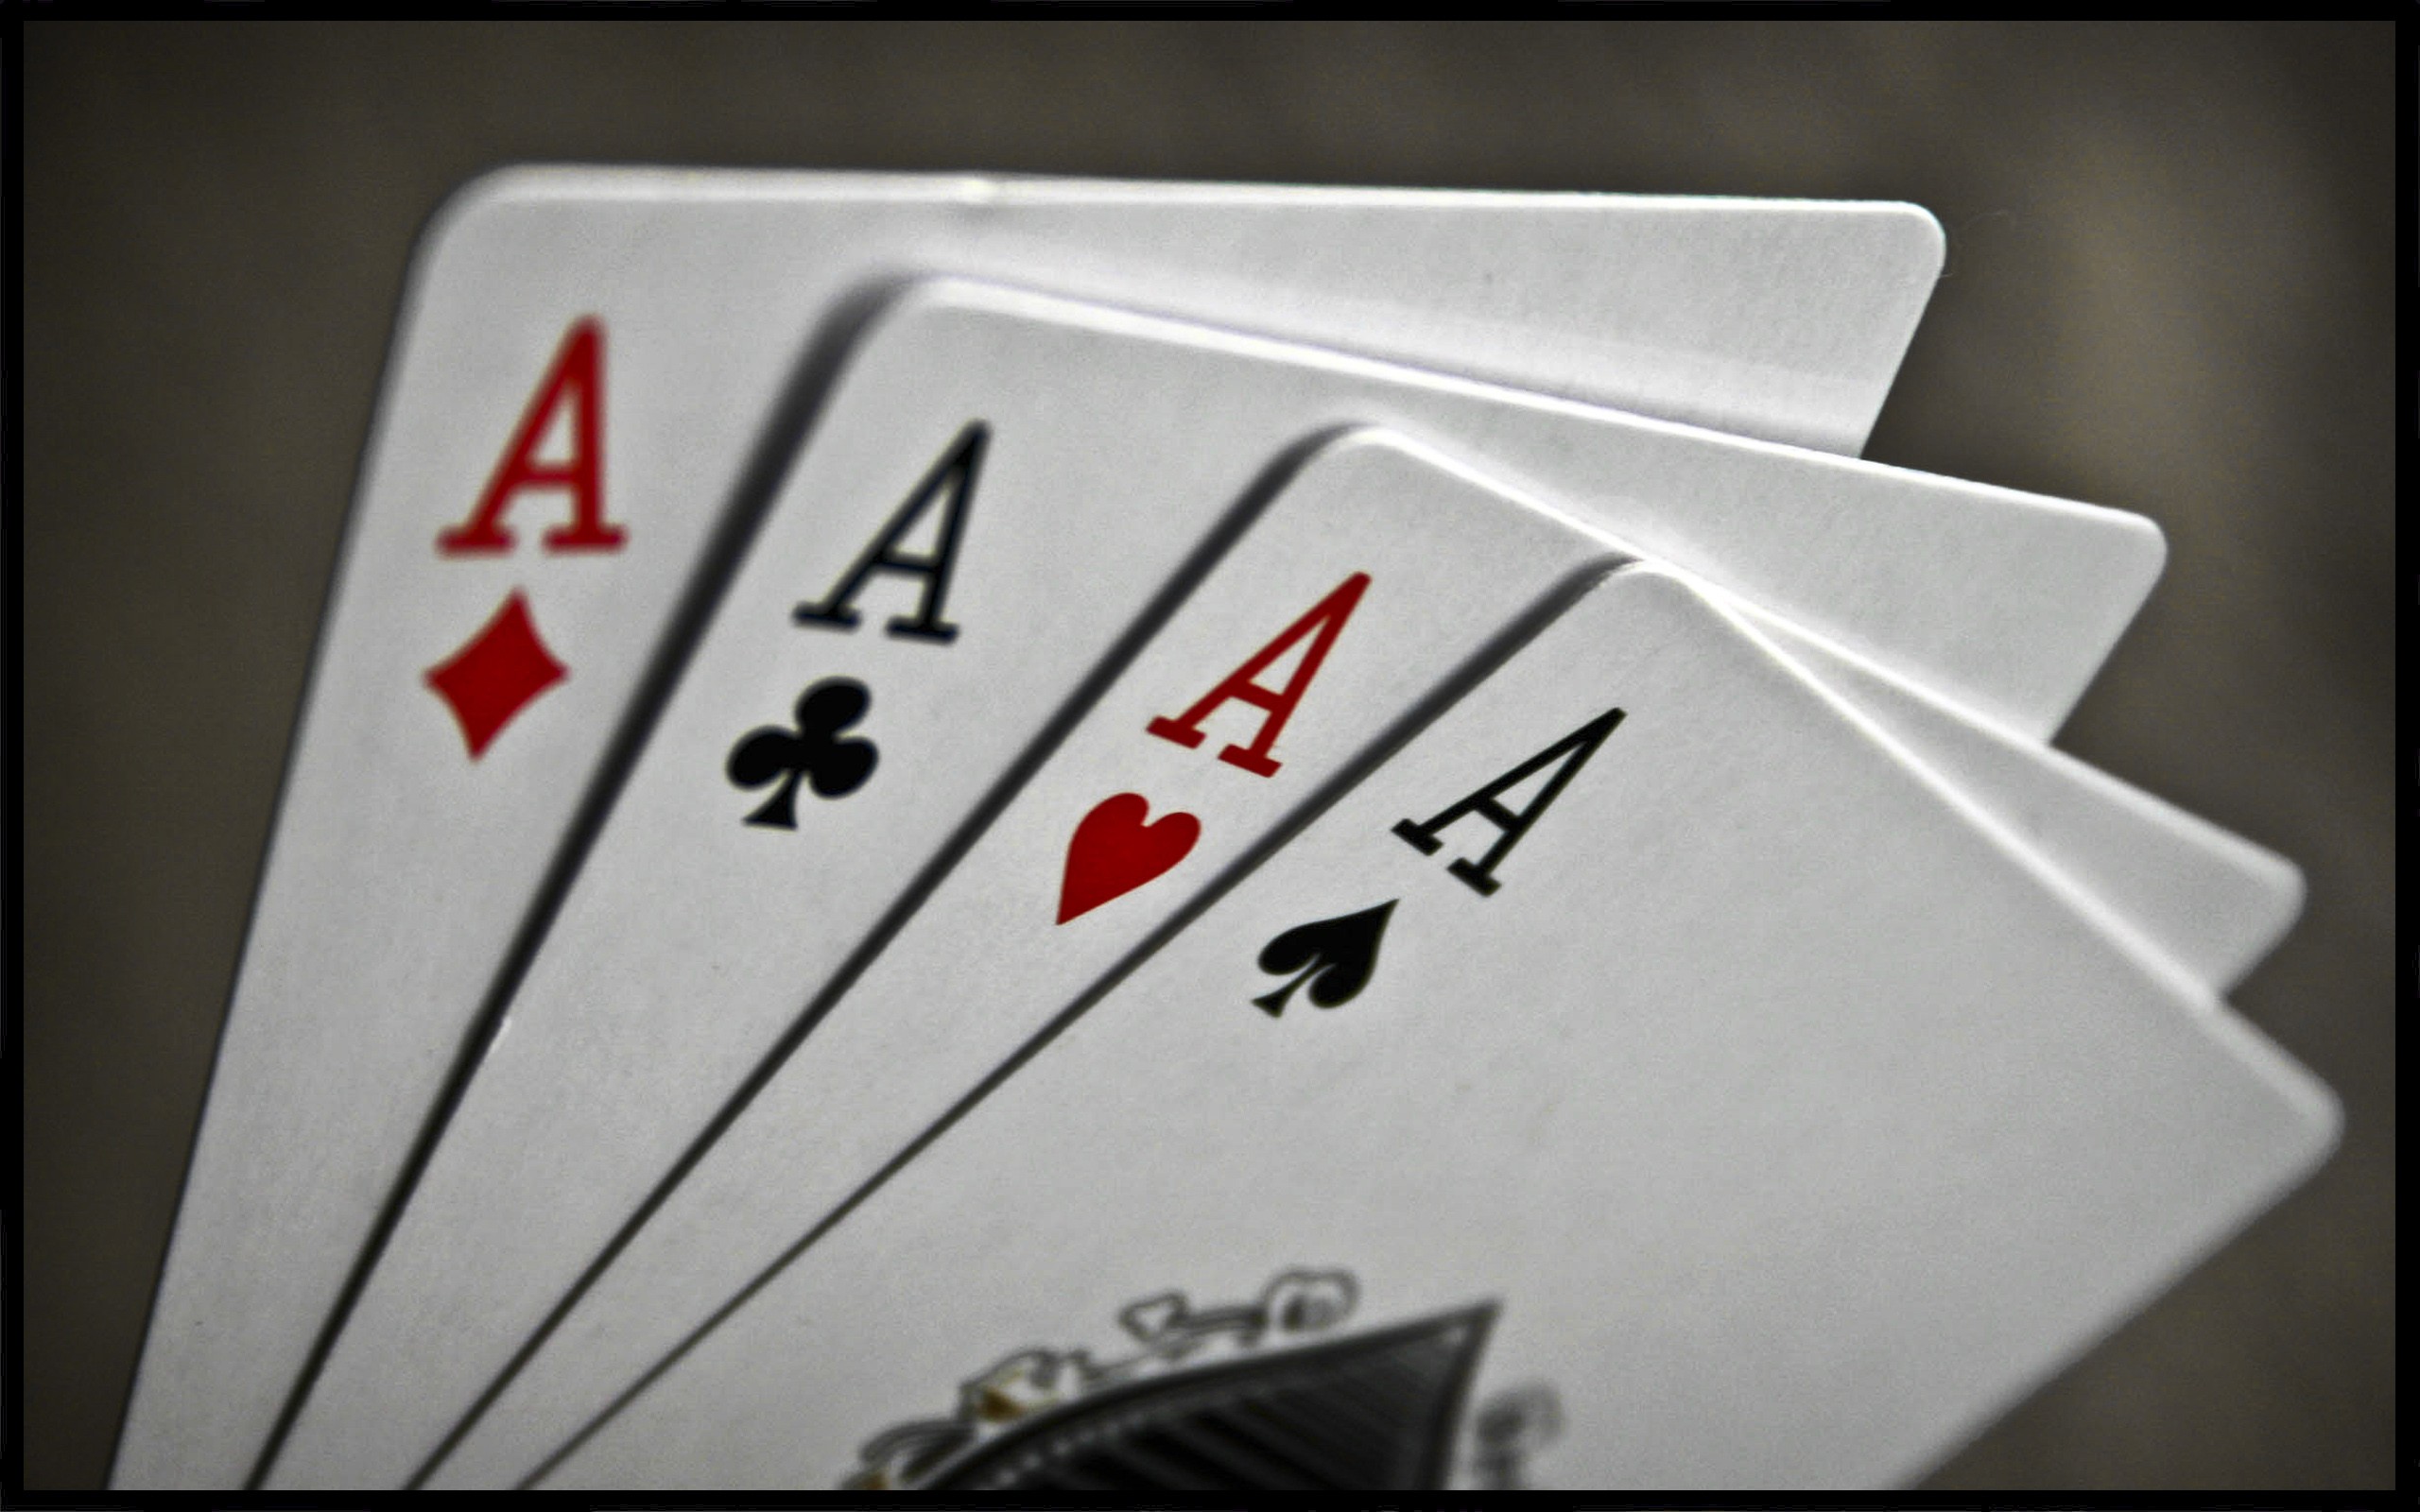 Aces poker cards